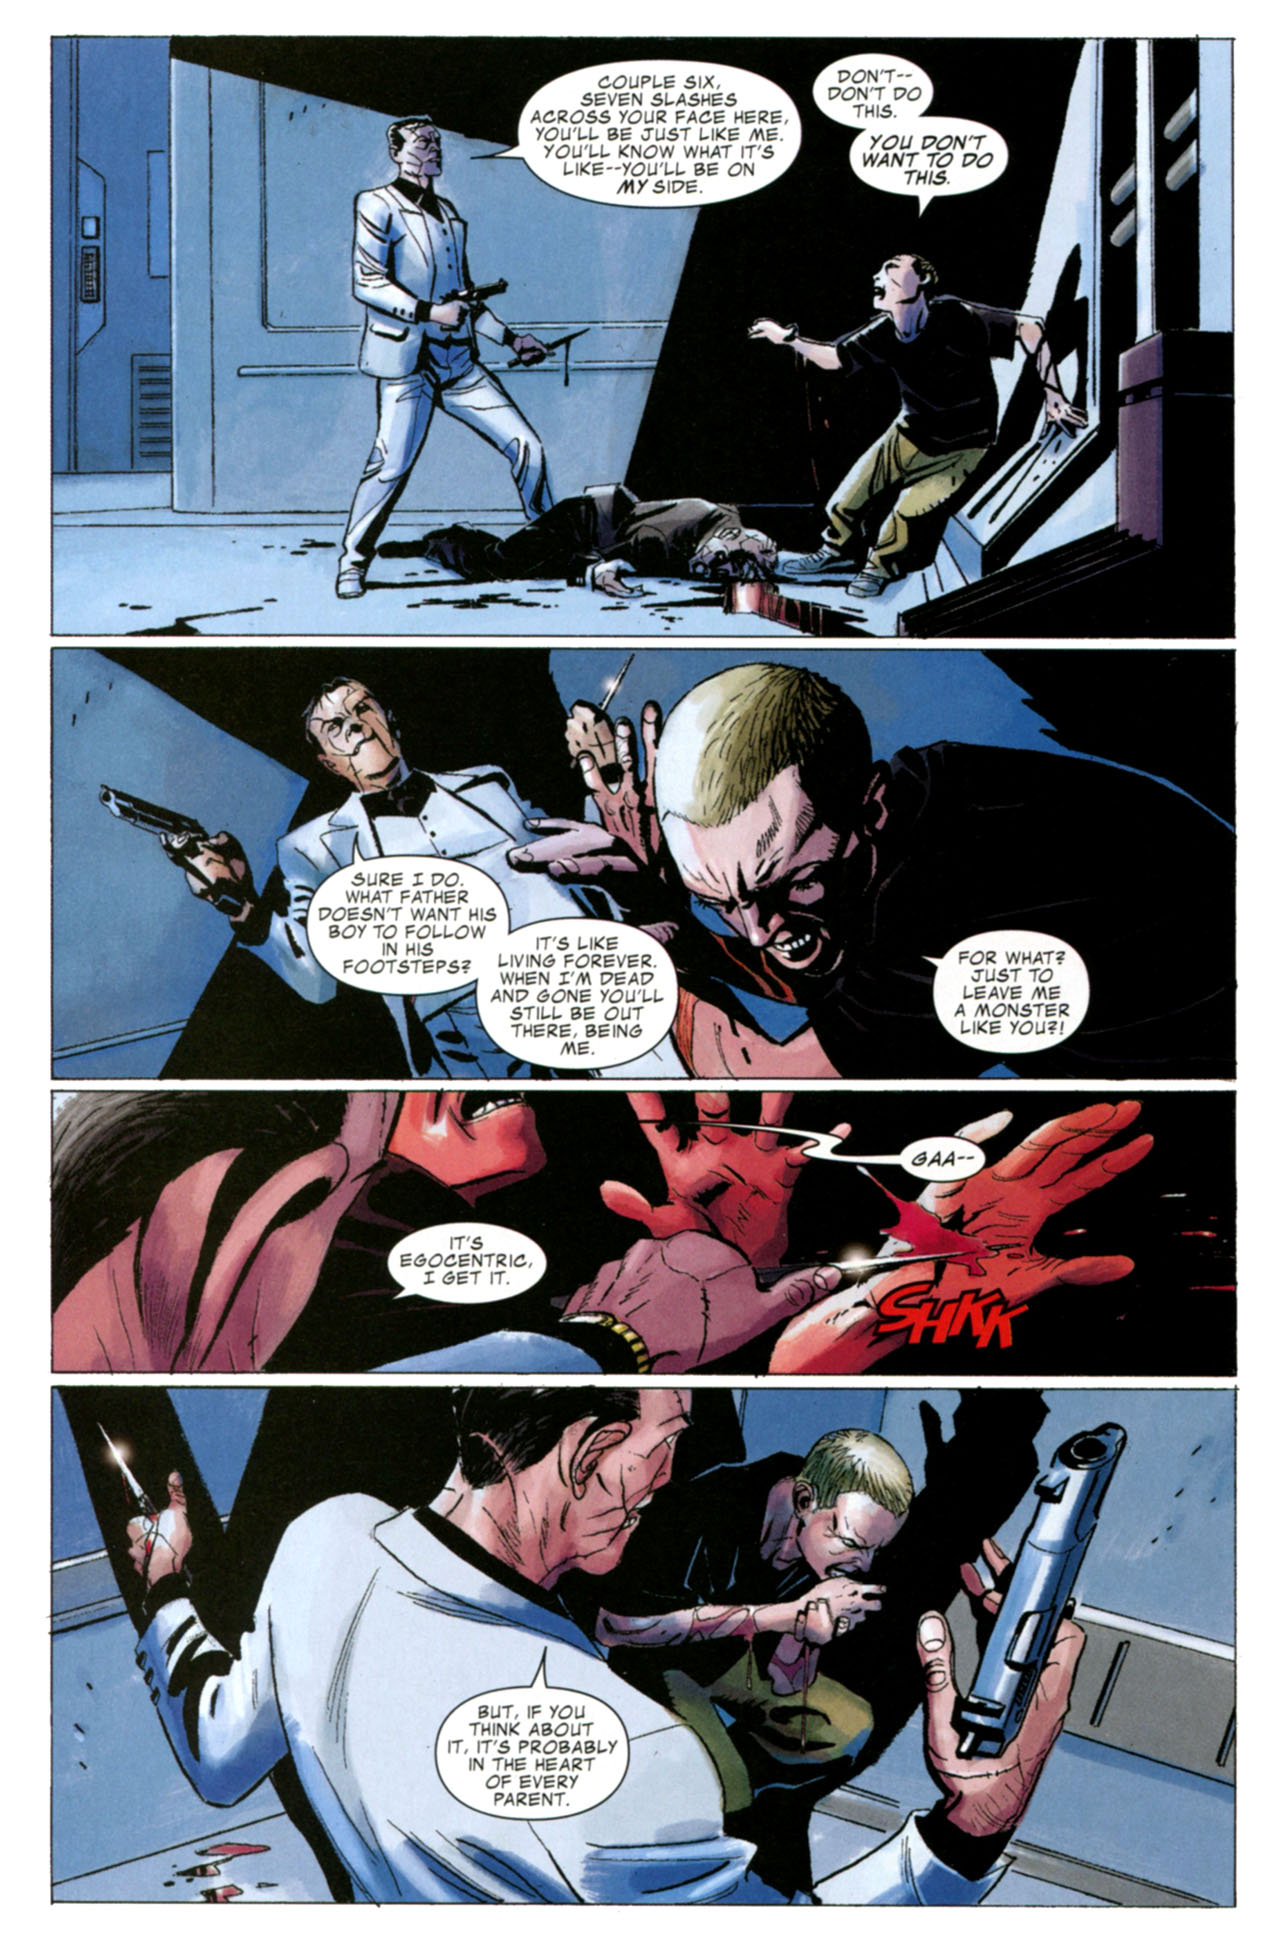 Punisher: In The Blood #5 - In the Blood, Part Five: Conclusion